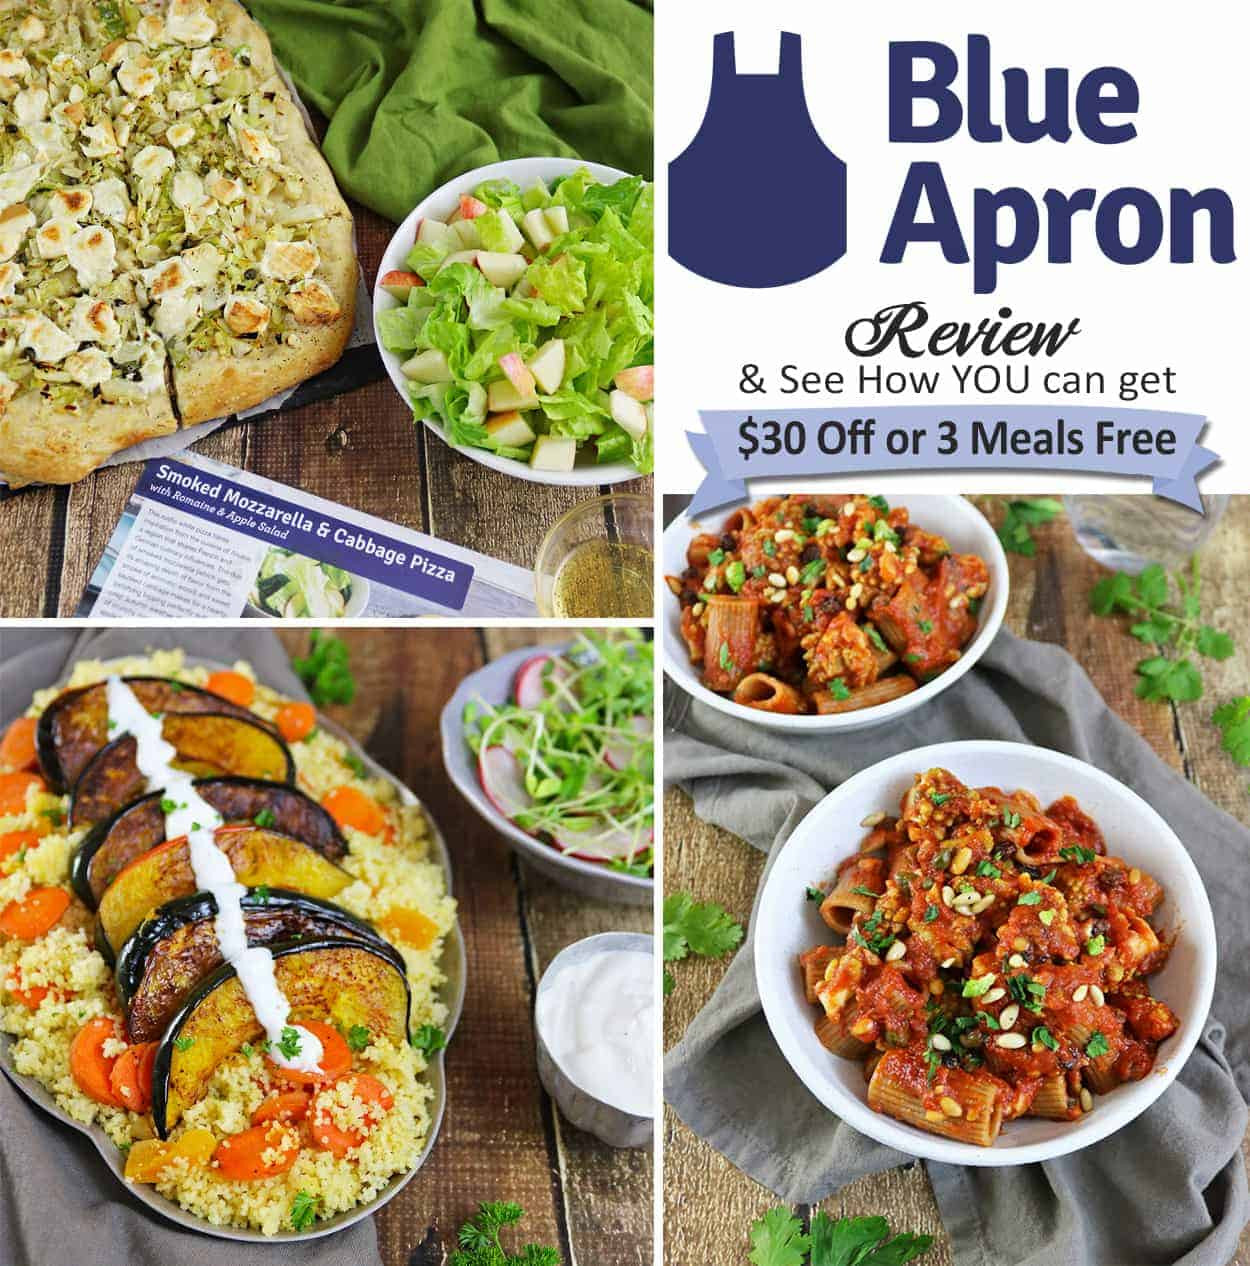 Blue Apron Vegetarian Recipes
 Review of The Meal Delivery Service by Blue Apron